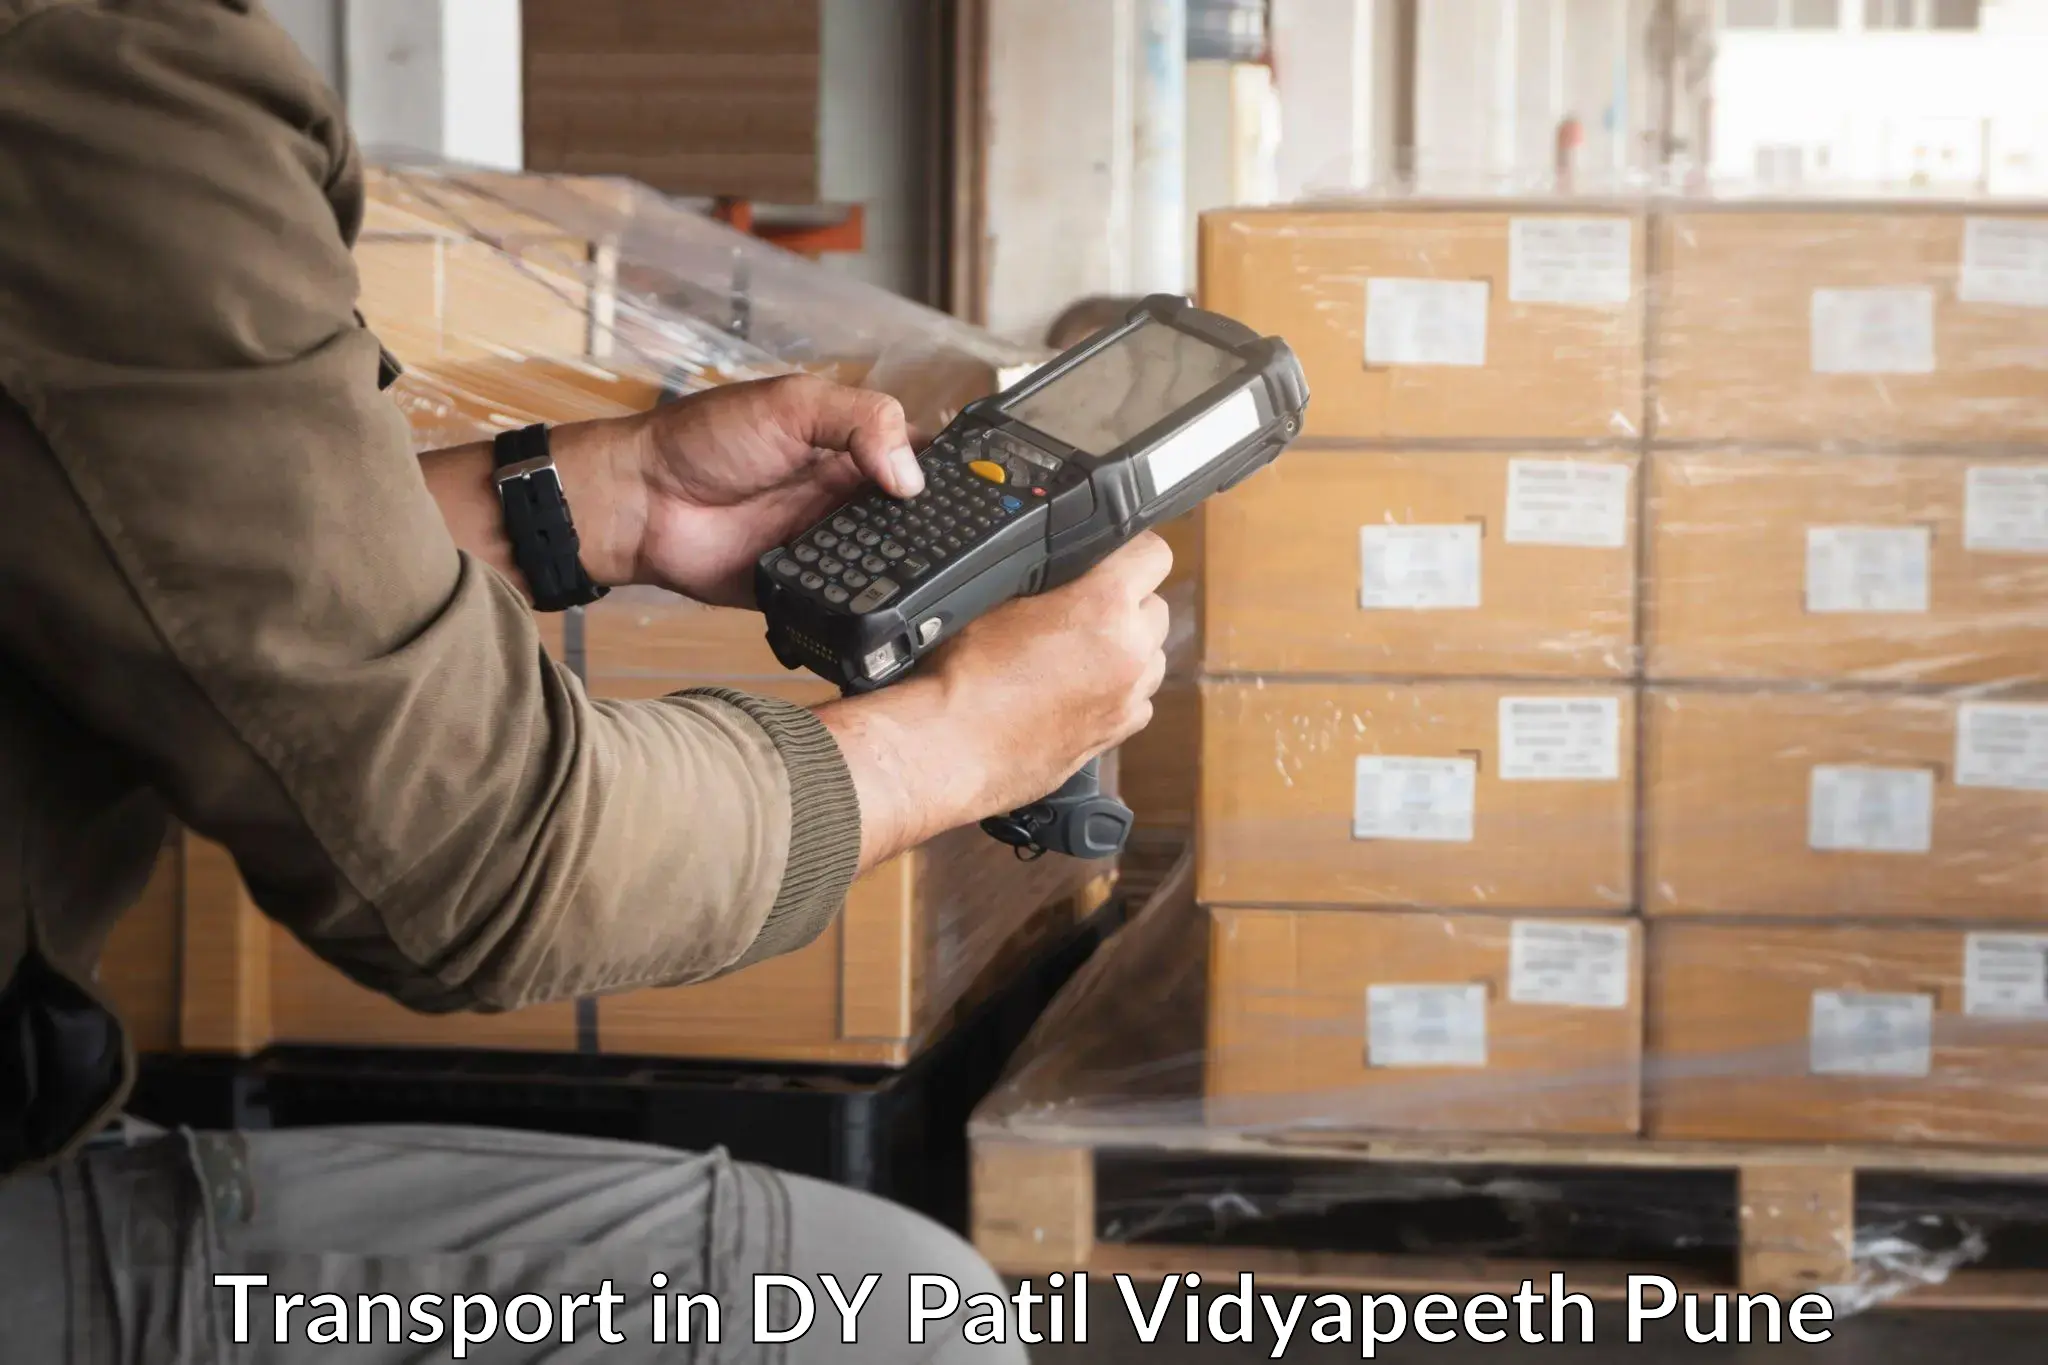 Truck transport companies in India in DY Patil Vidyapeeth Pune